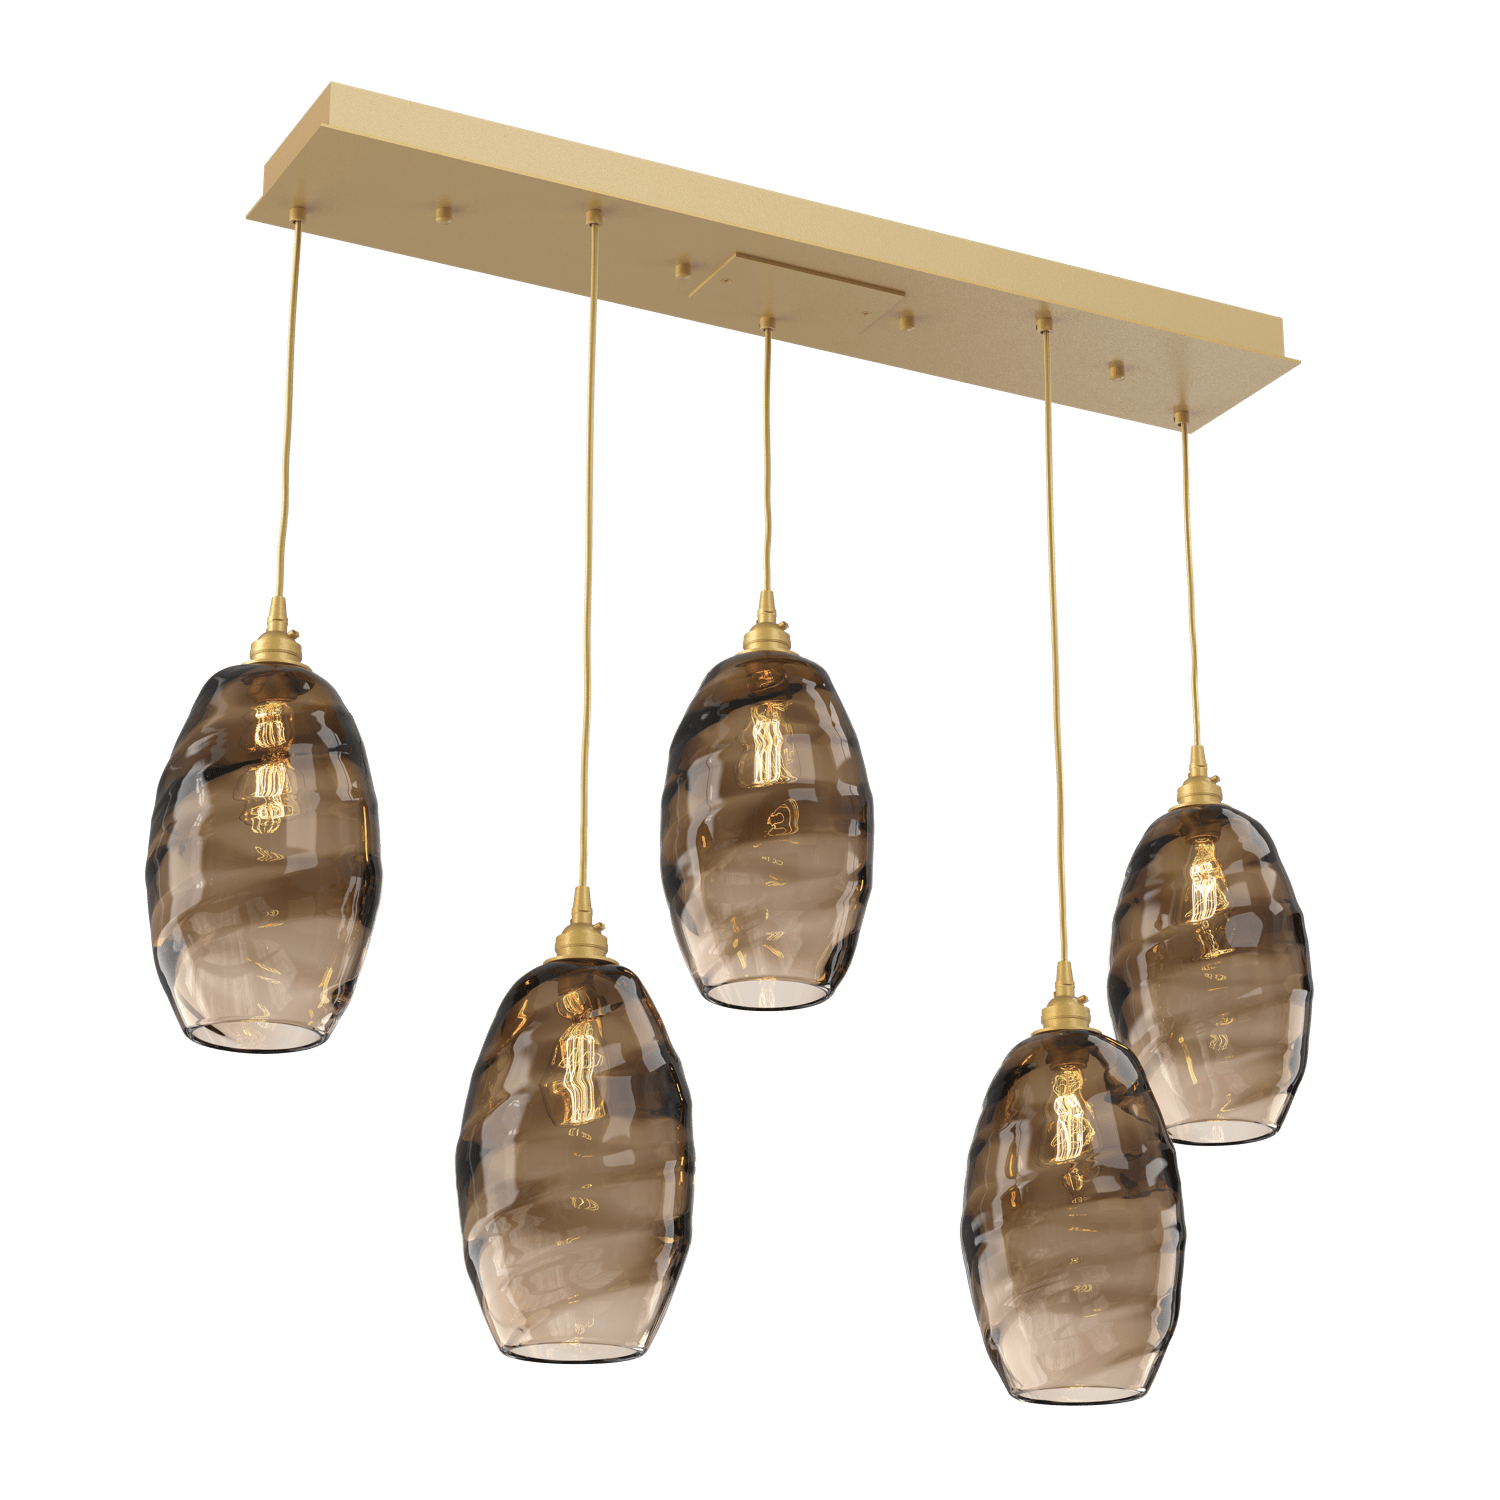 PLB0035-05-GB-OB-Hammerton-Studio-Optic-Blown-Glass-Elisse-5-light-linear-pendant-chandelier-with-gilded-brass-finish-and-optic-bronze-blown-glass-shades-and-incandescent-lamping